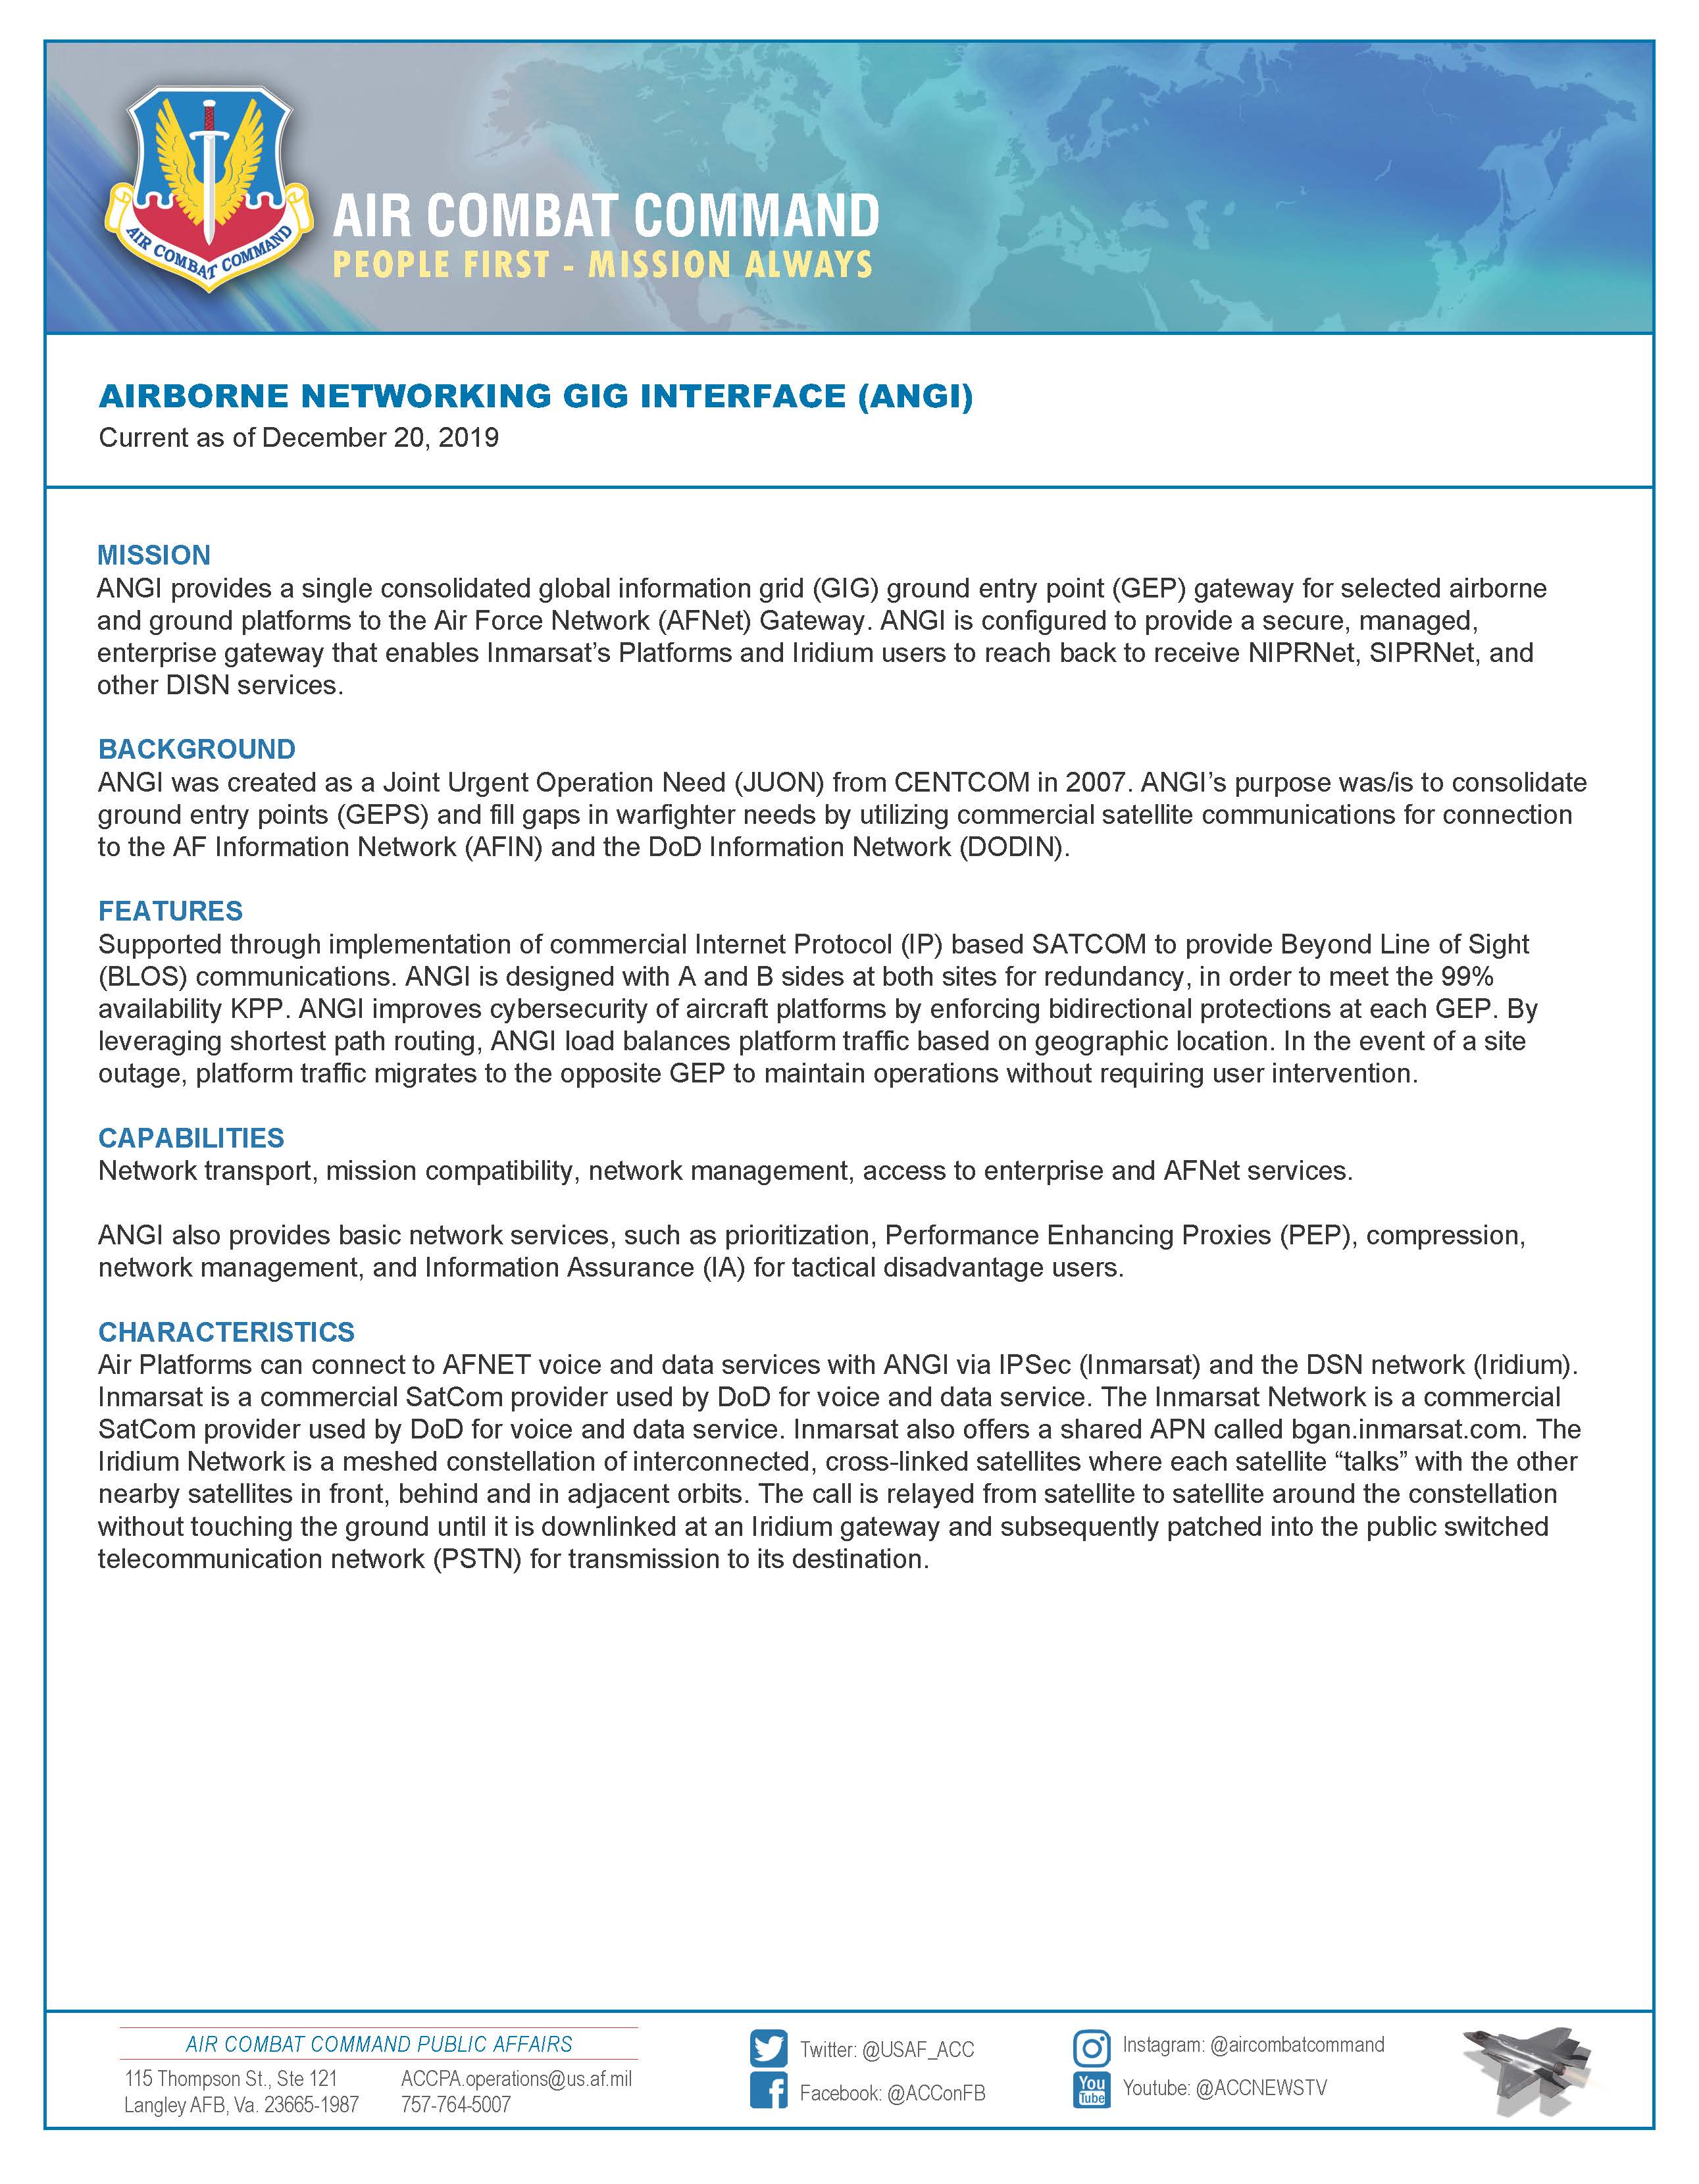 Airborne Networking GIG Interface Fact Sheet